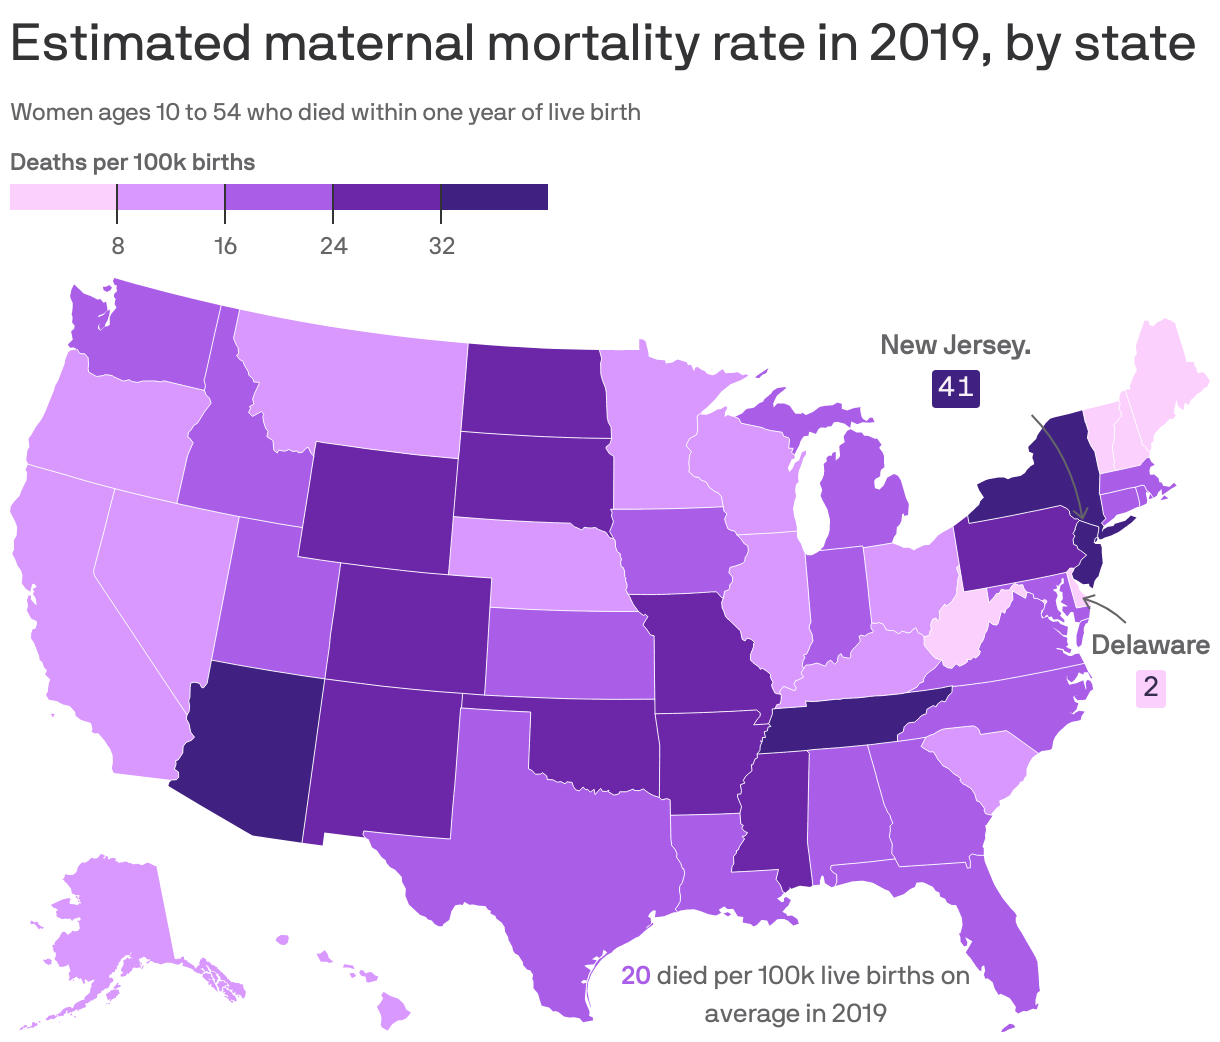 Estimated maternal mortality rate in 2019, by state